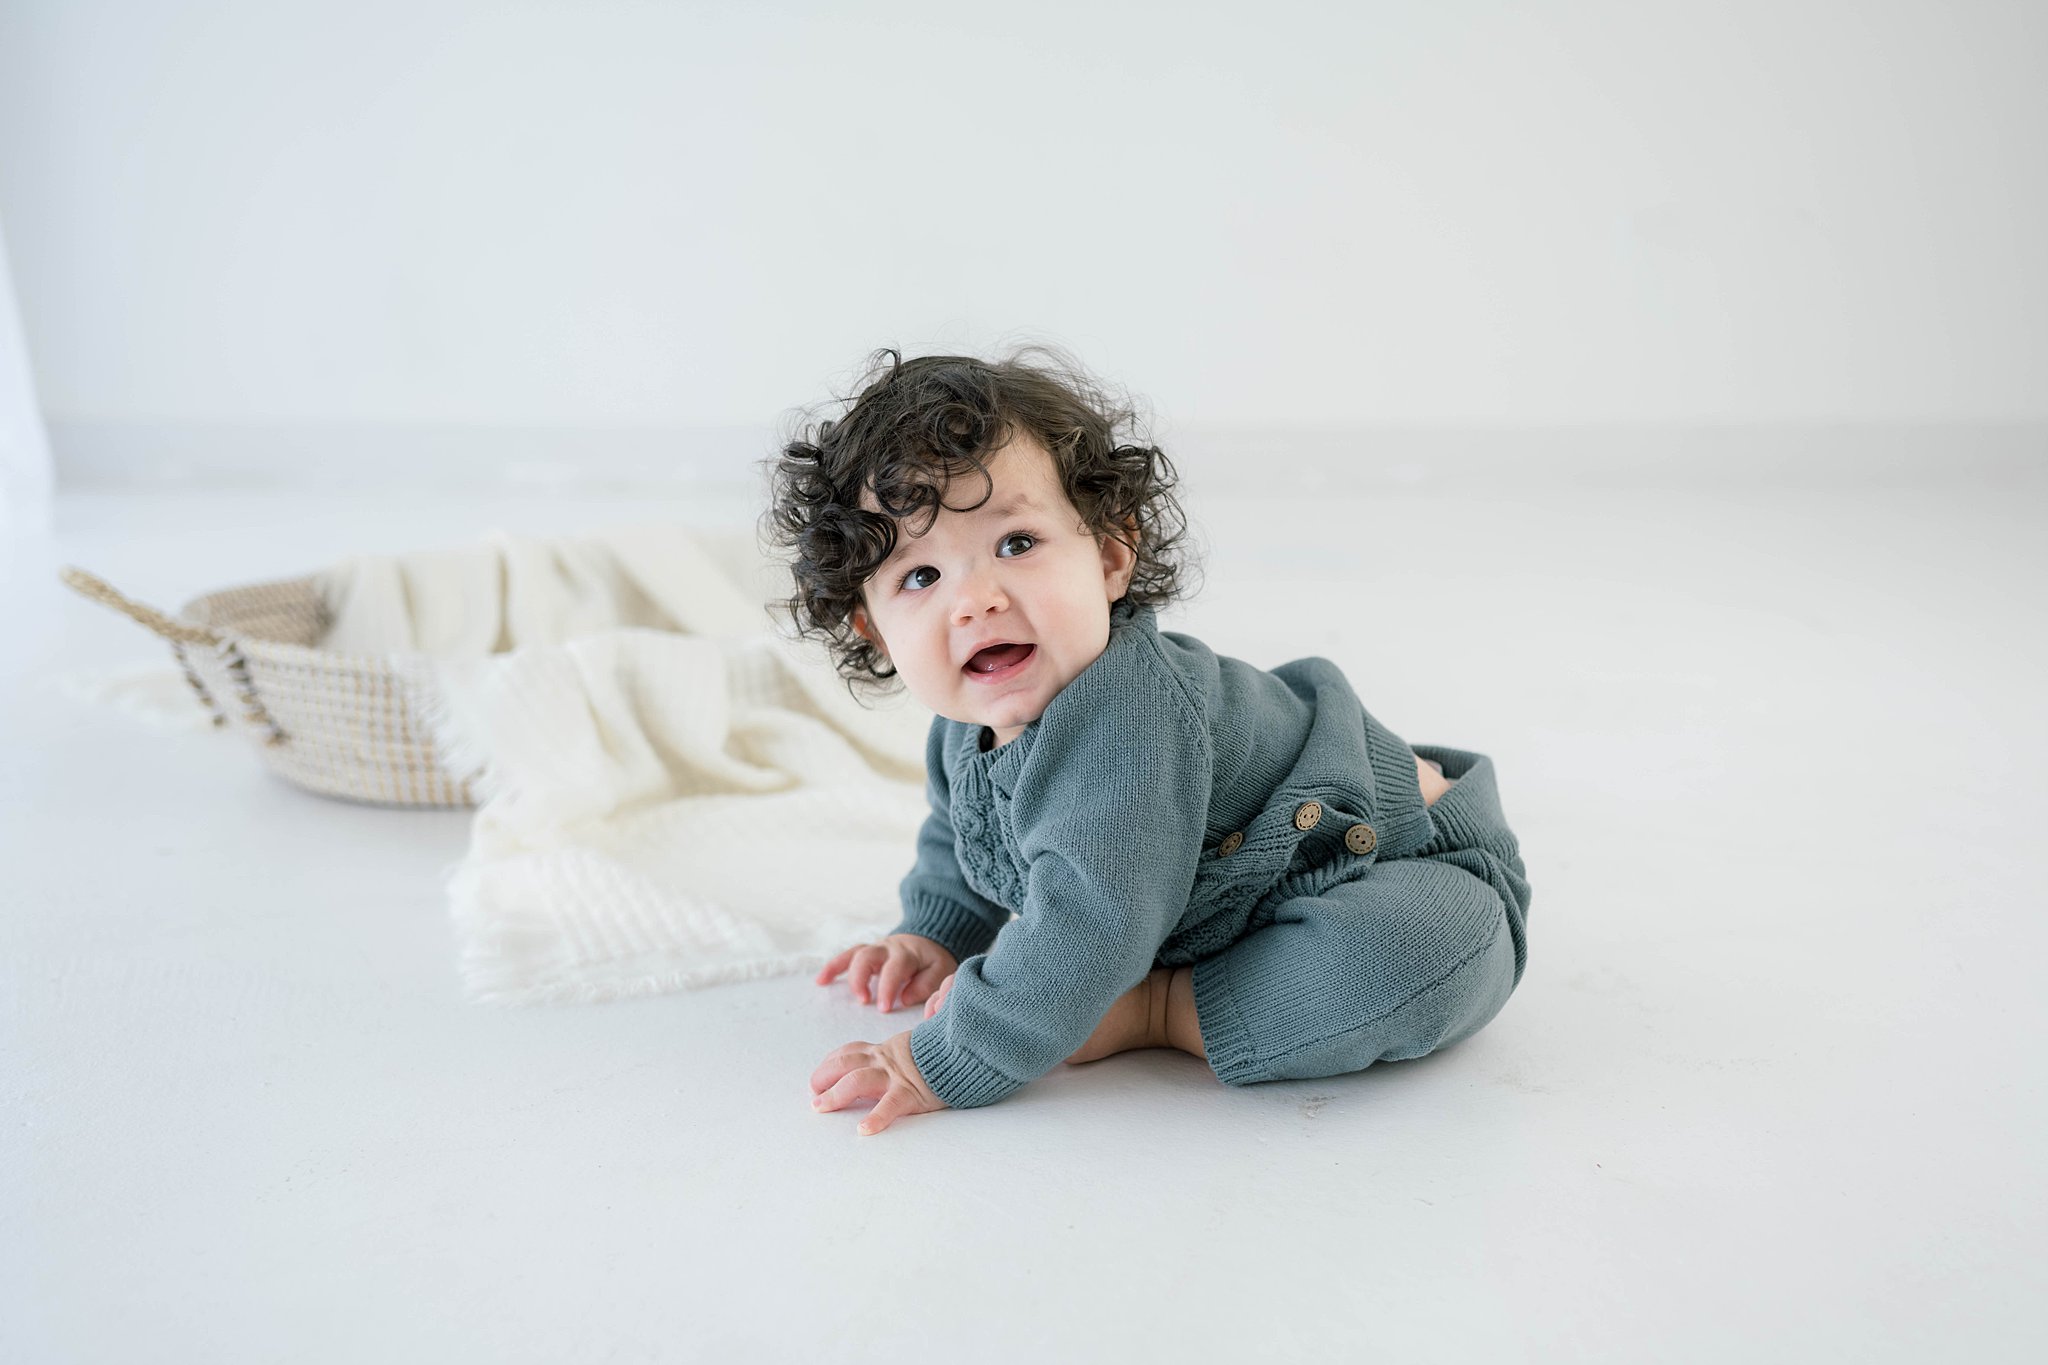 A young toddler in a blue outfit plays on the floor of a studio